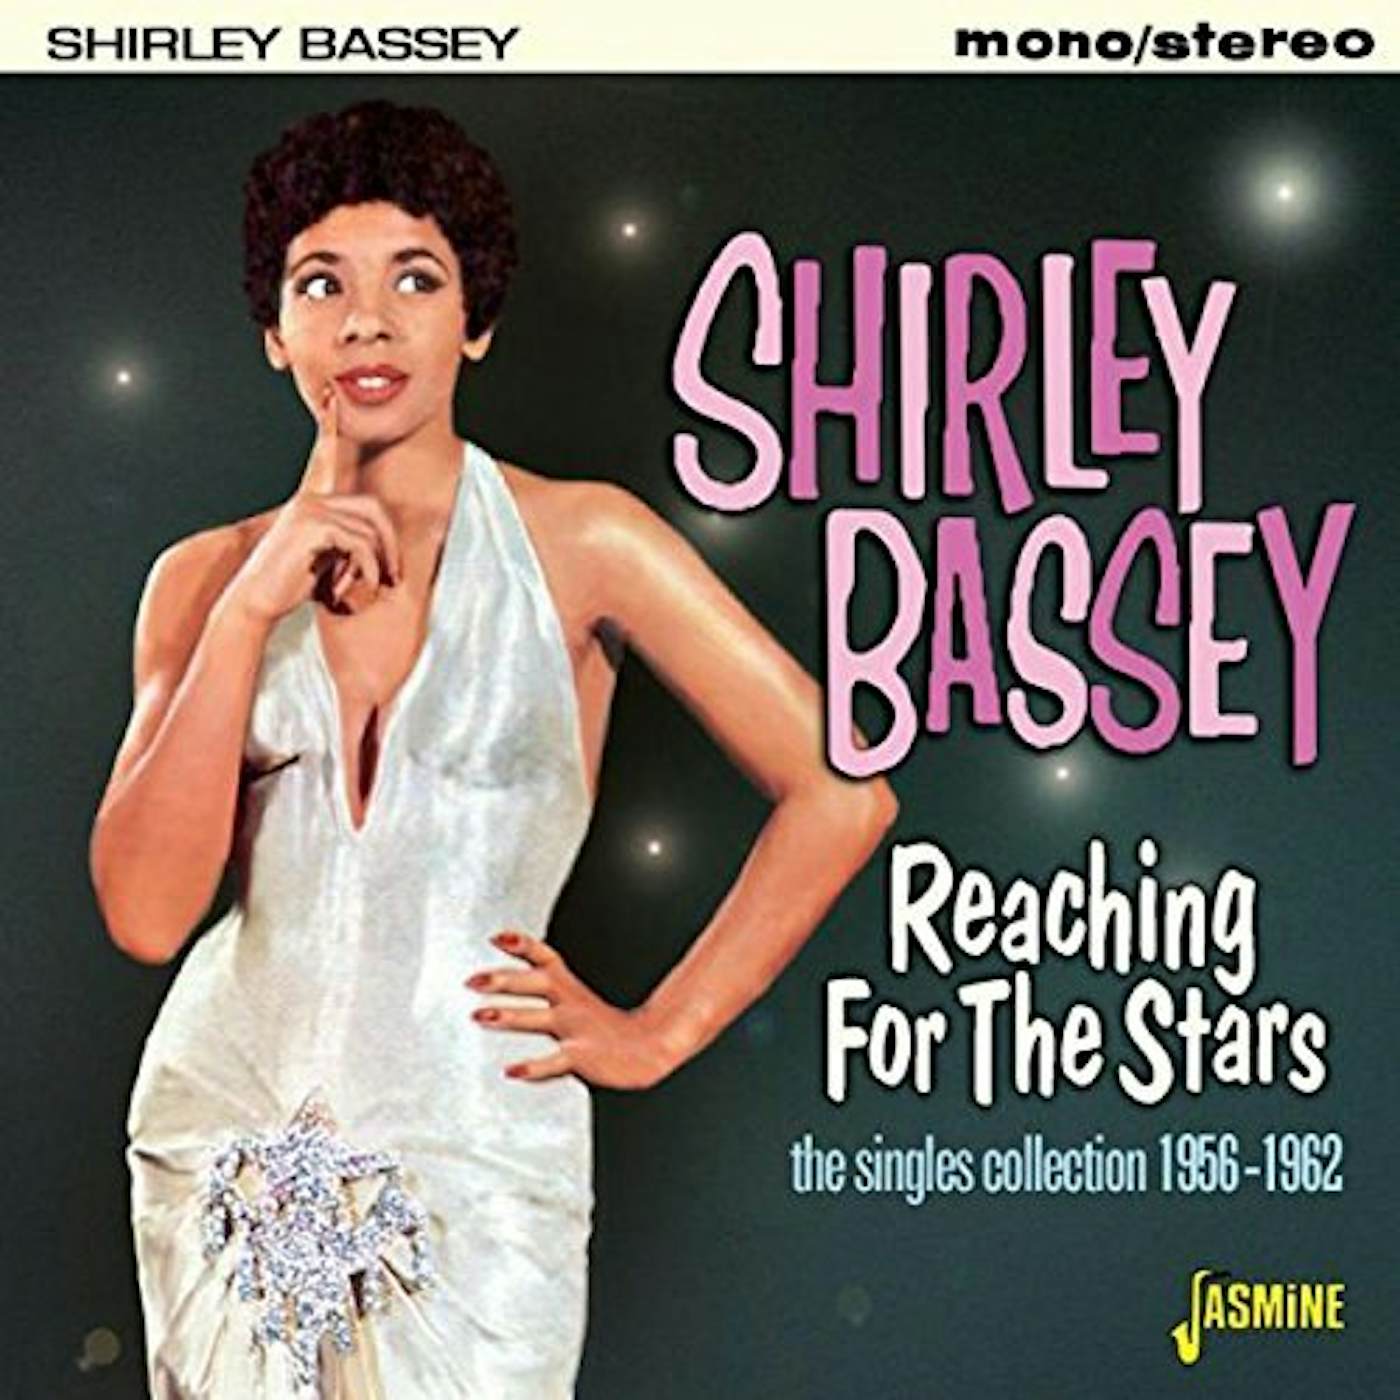 Shirley Bassey REACHING FOR THE STARS: SINGLES COLLECTION 1956-62 CD